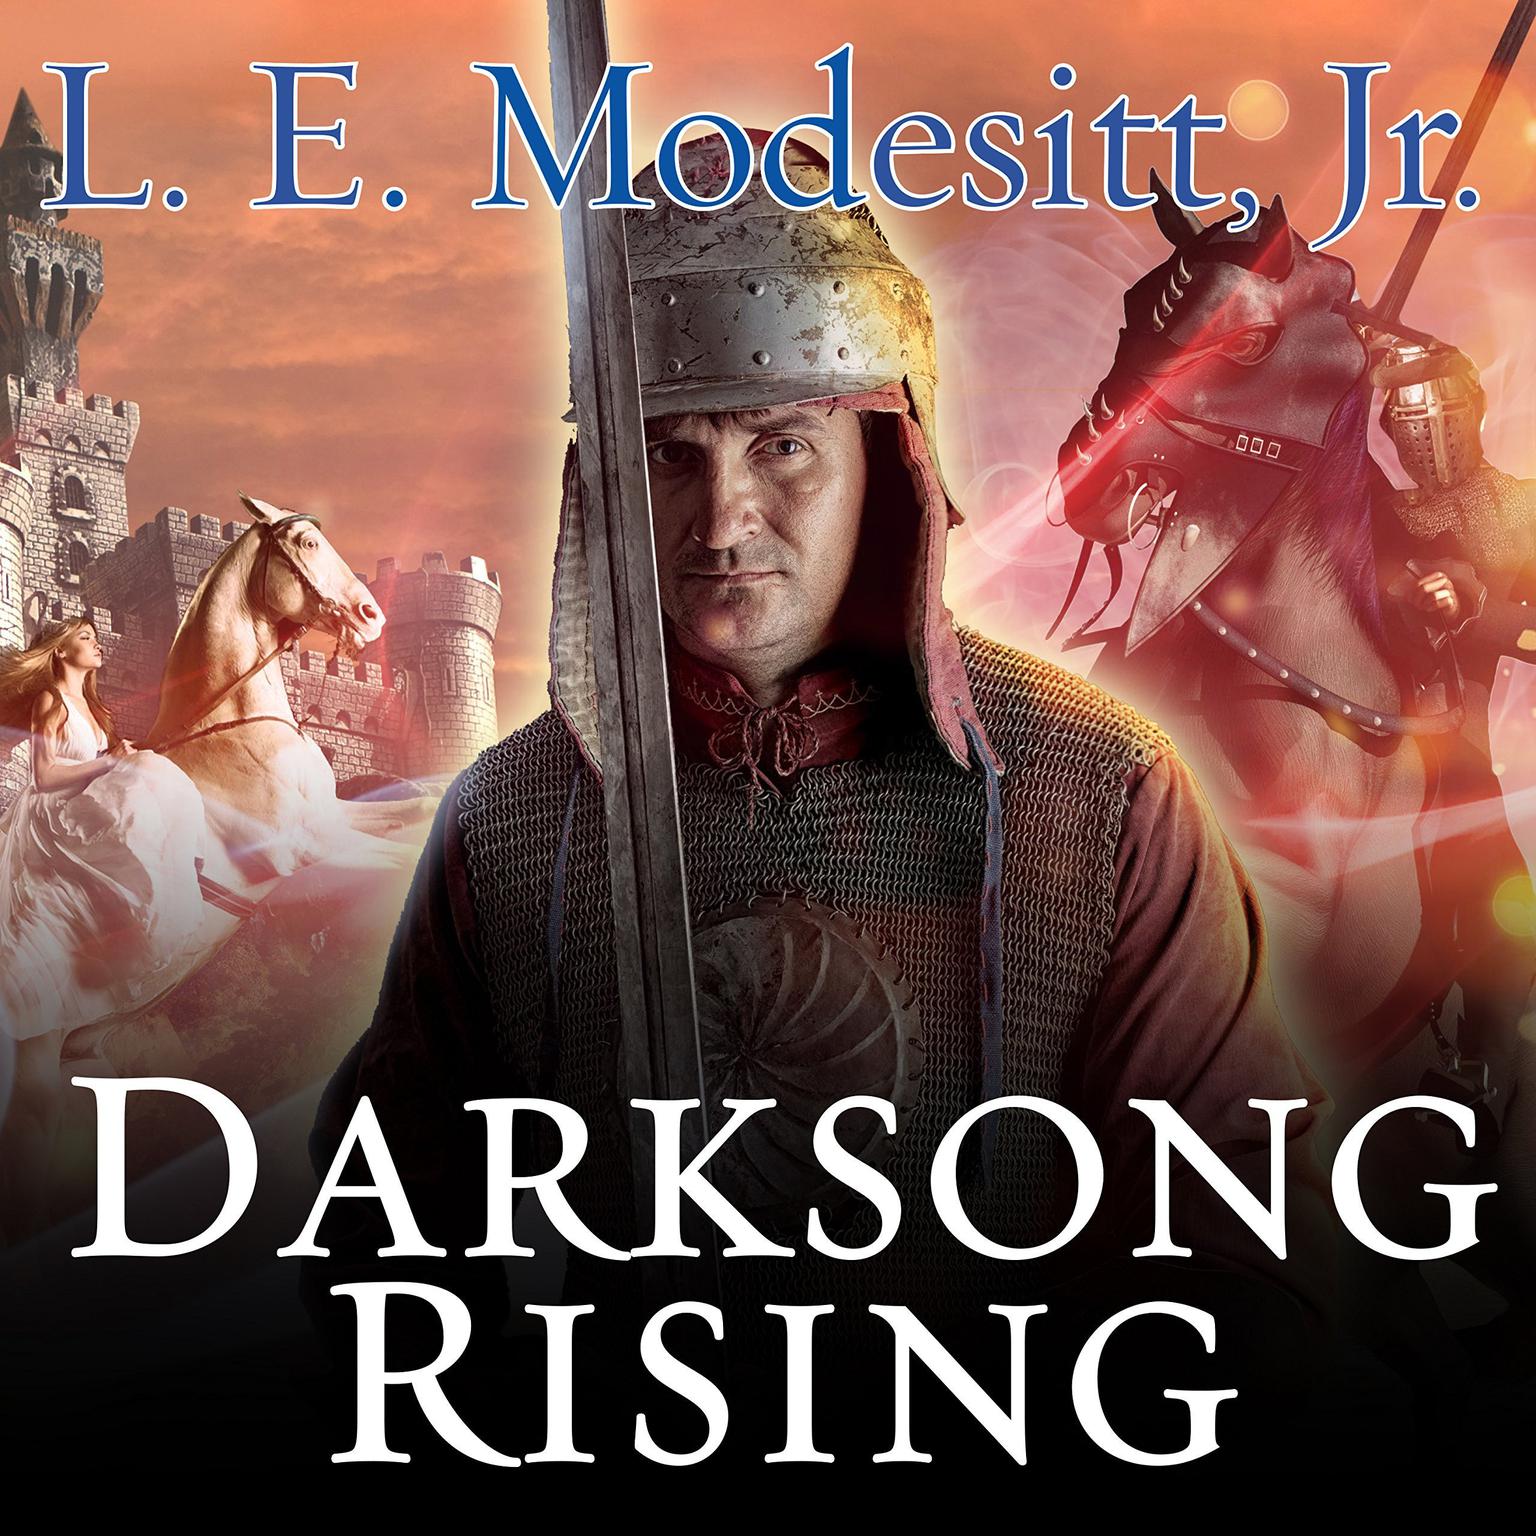 Darksong Rising: The Third Book of the Spellsong Cycle Audiobook, by L. E. Modesitt